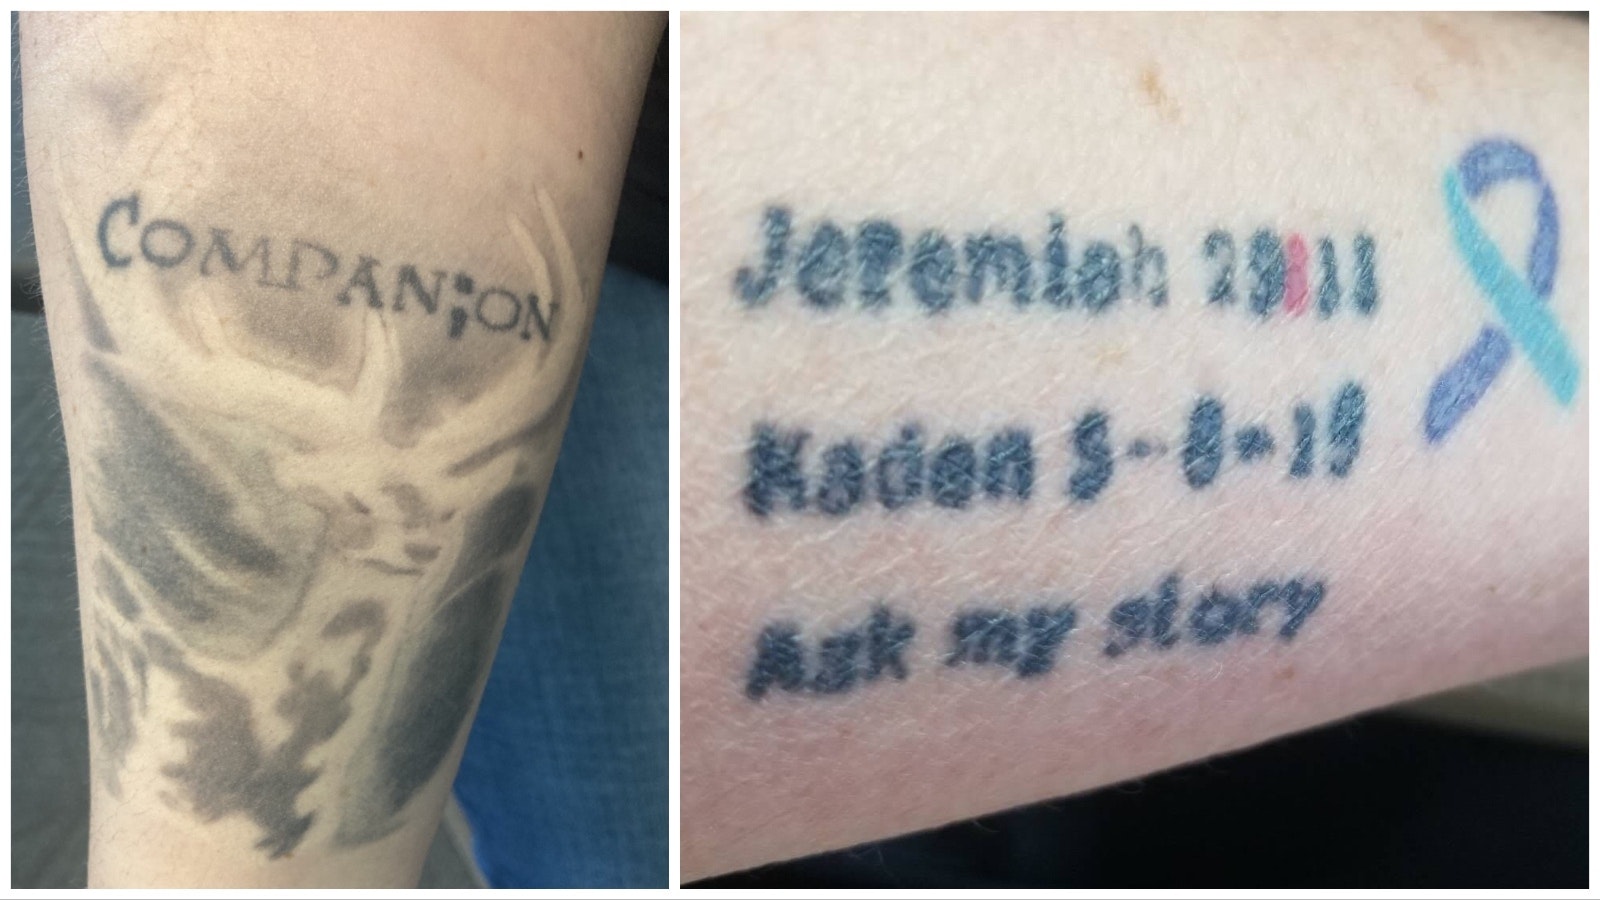 Ashley Simonson, left, and her mother Trish, right, each have semicolon tattoos to remember their brother and son Kaden, who took his own life eight years ago at age 15.